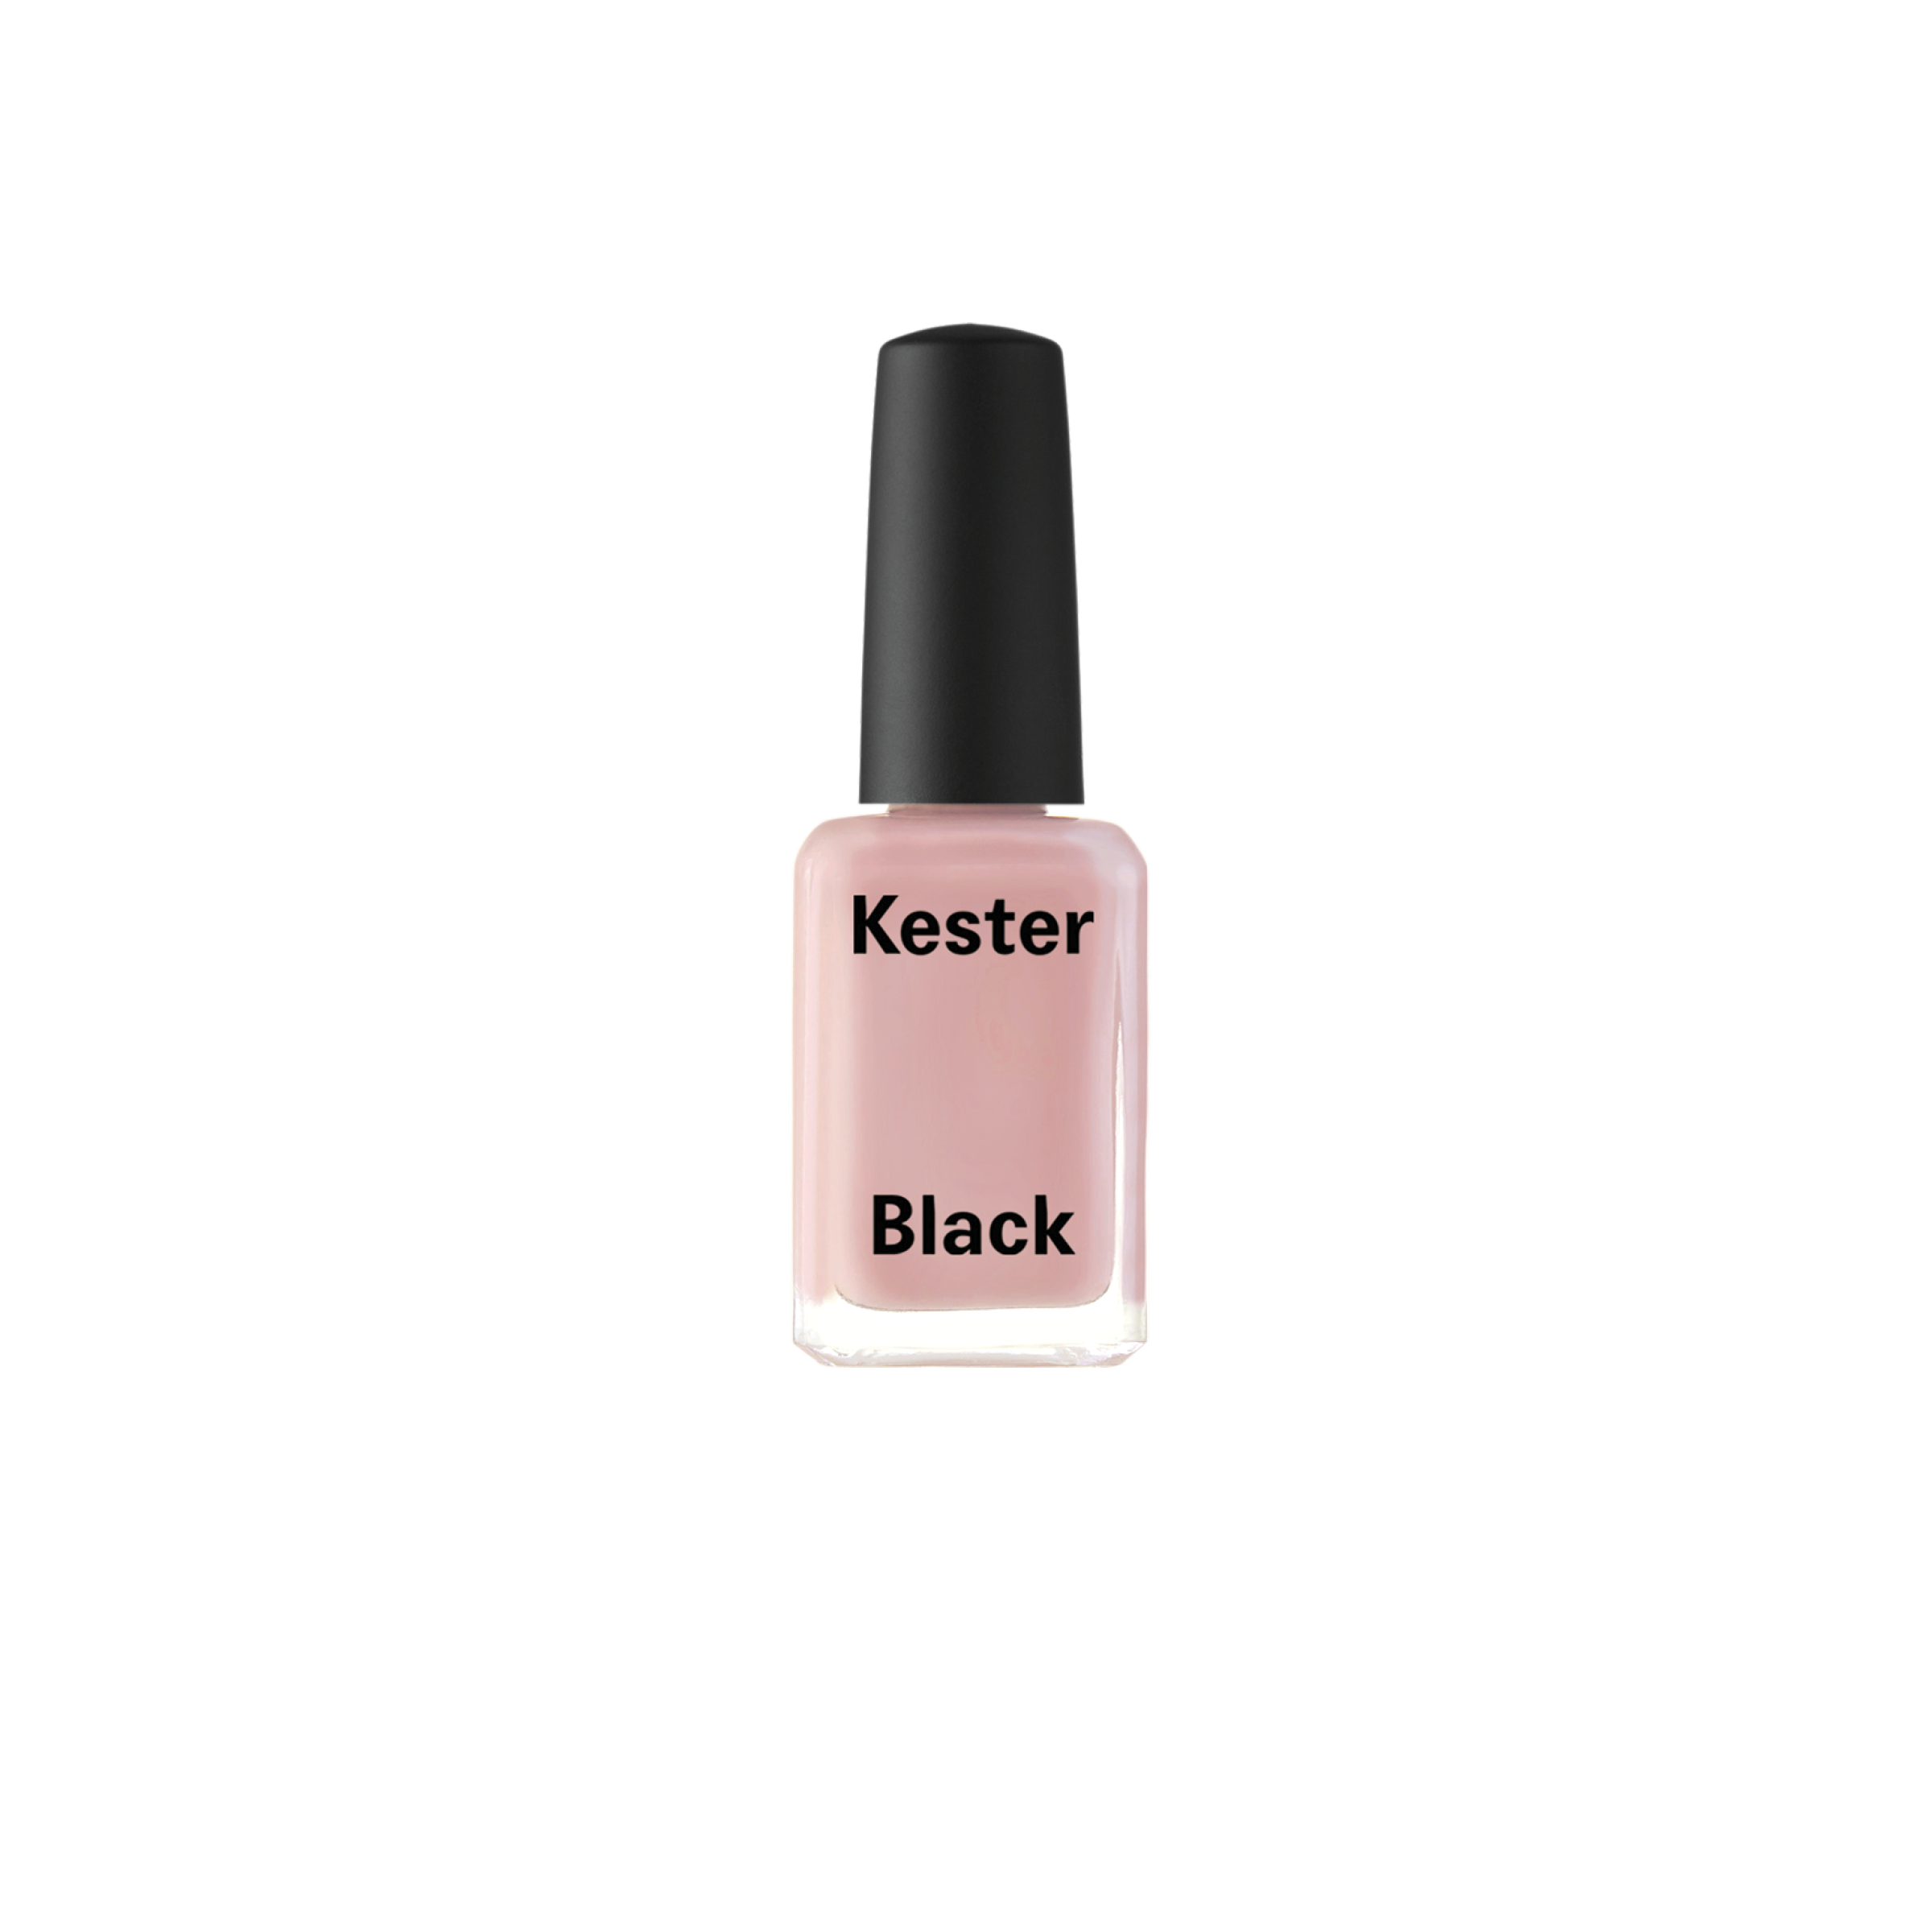 Kester Black Summer 2016/17 Review & Swatches